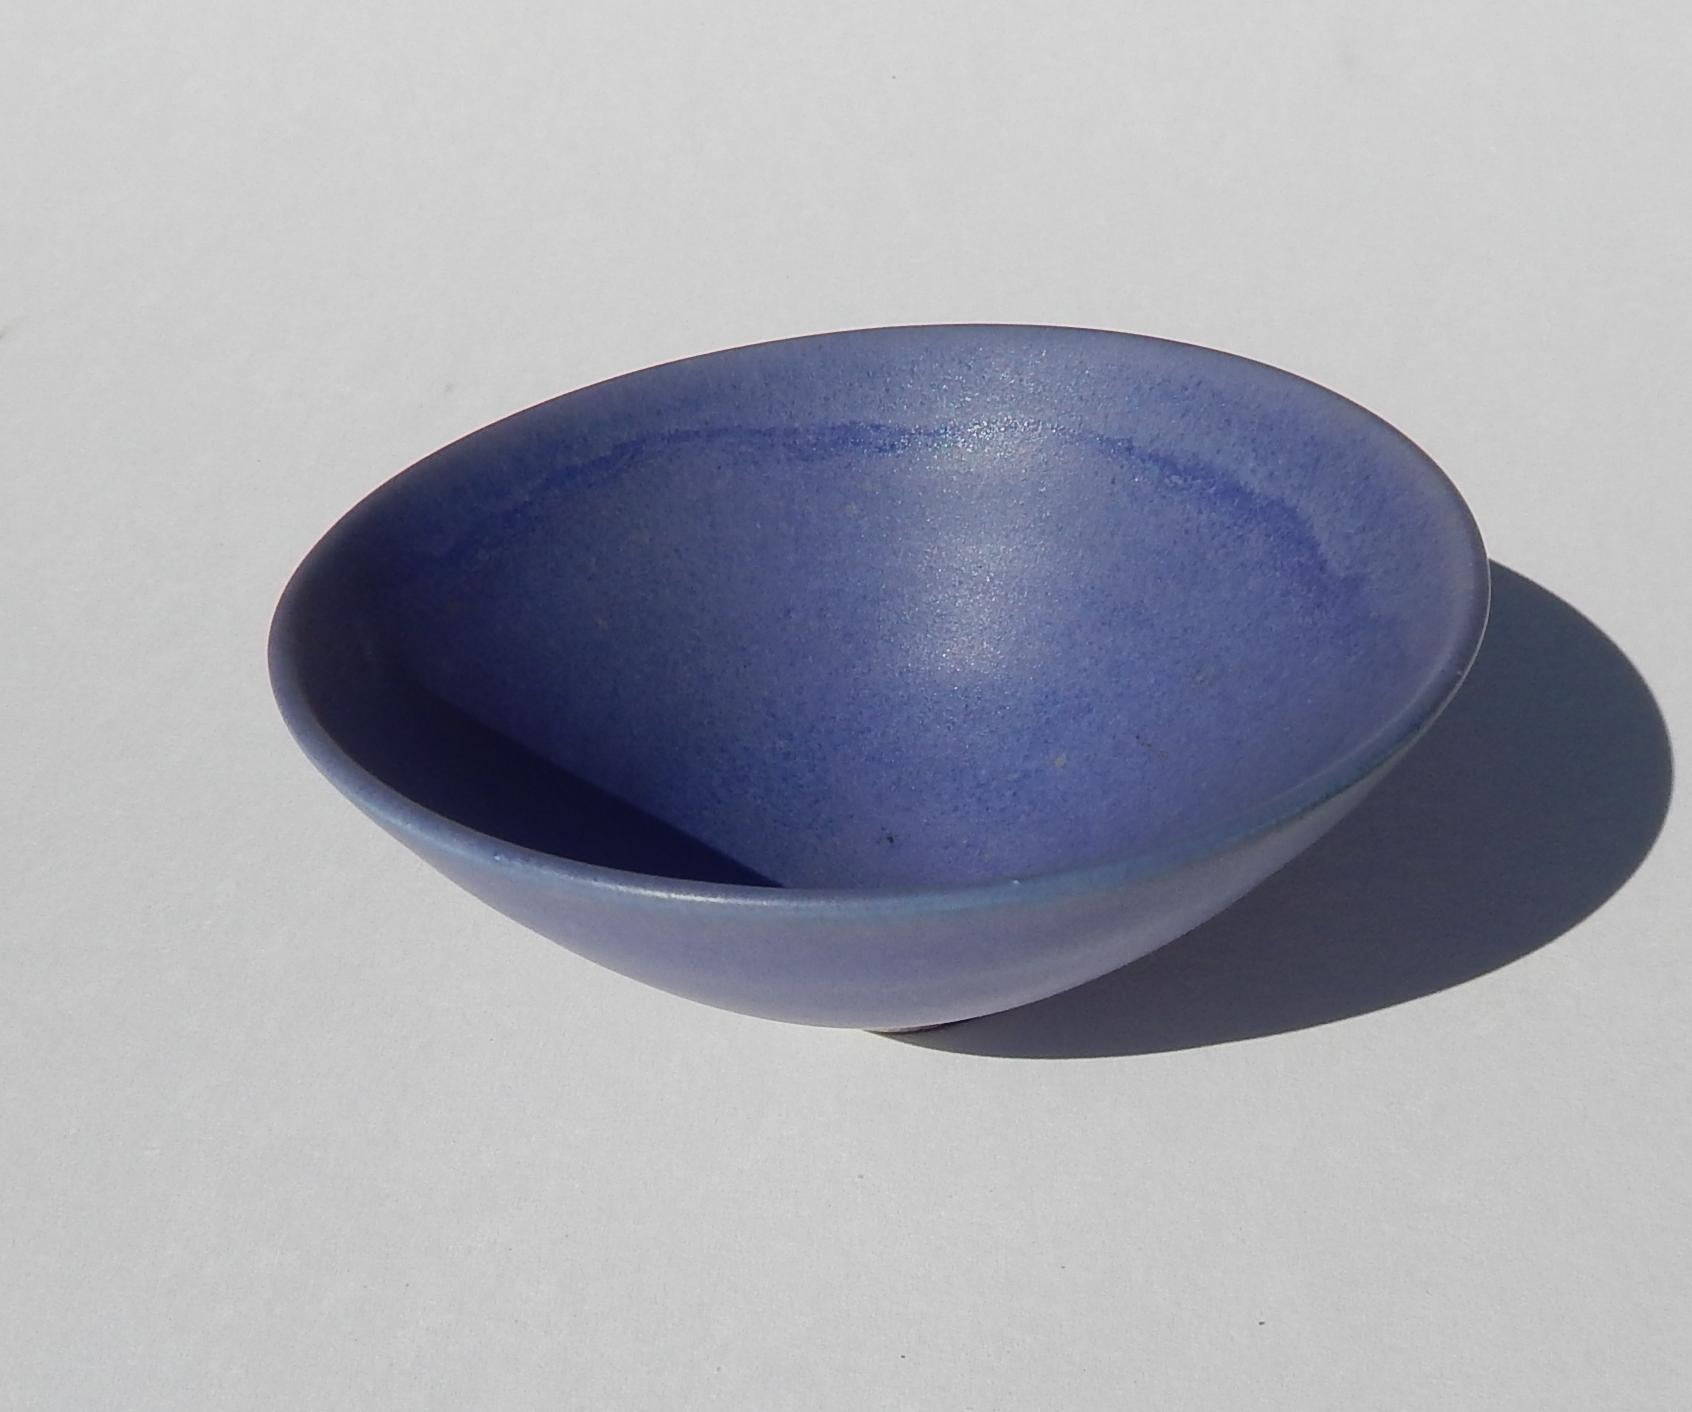 Viveka and Otto Heino exquistie small flared bowl in Robin's egg blue.
Measures 2